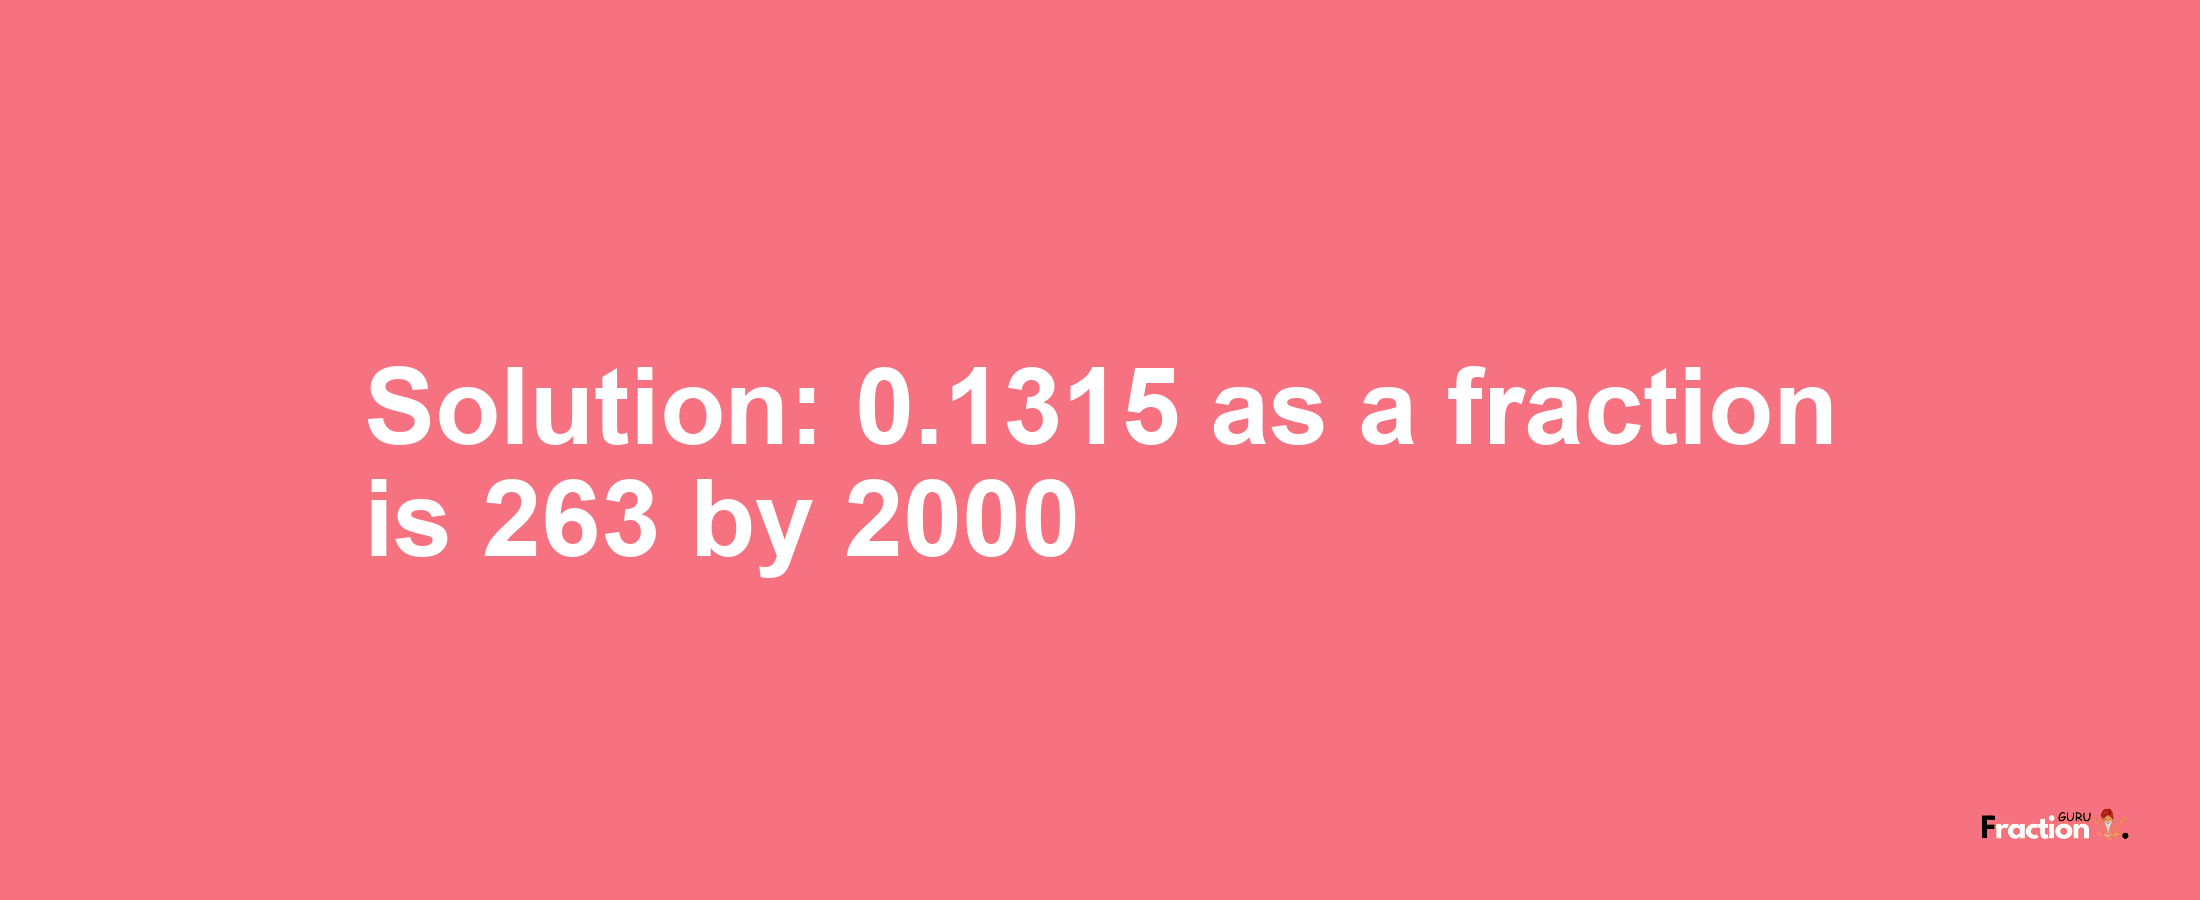 Solution:0.1315 as a fraction is 263/2000